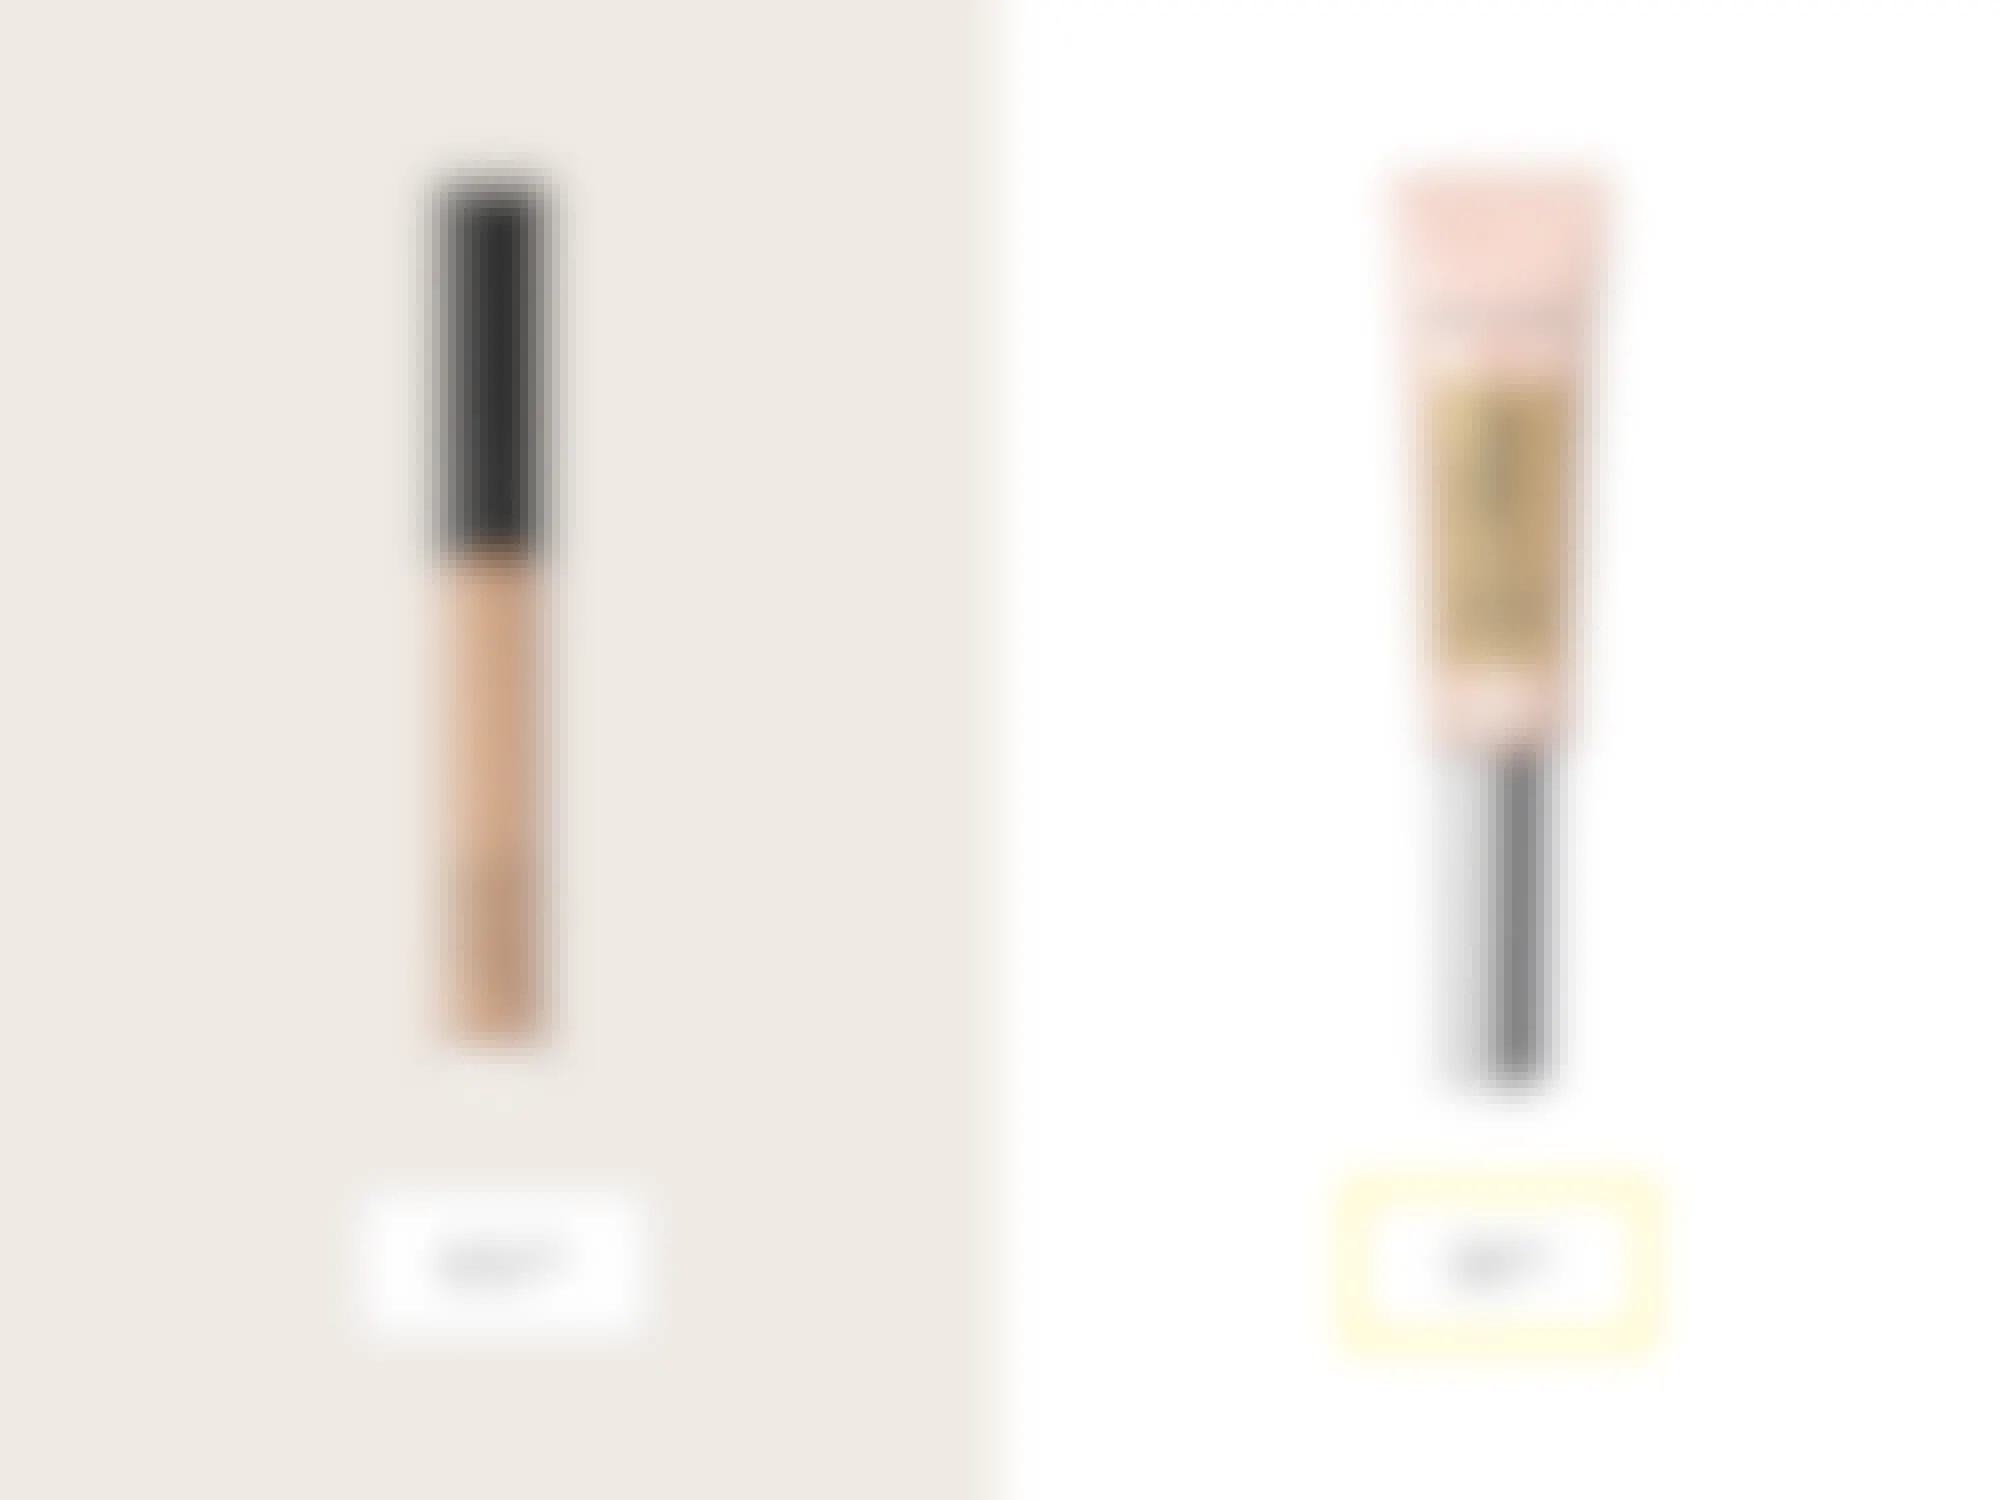 nars radiant creamy concealer and revlon photoready candid antioxidant concealer price comparison graphic